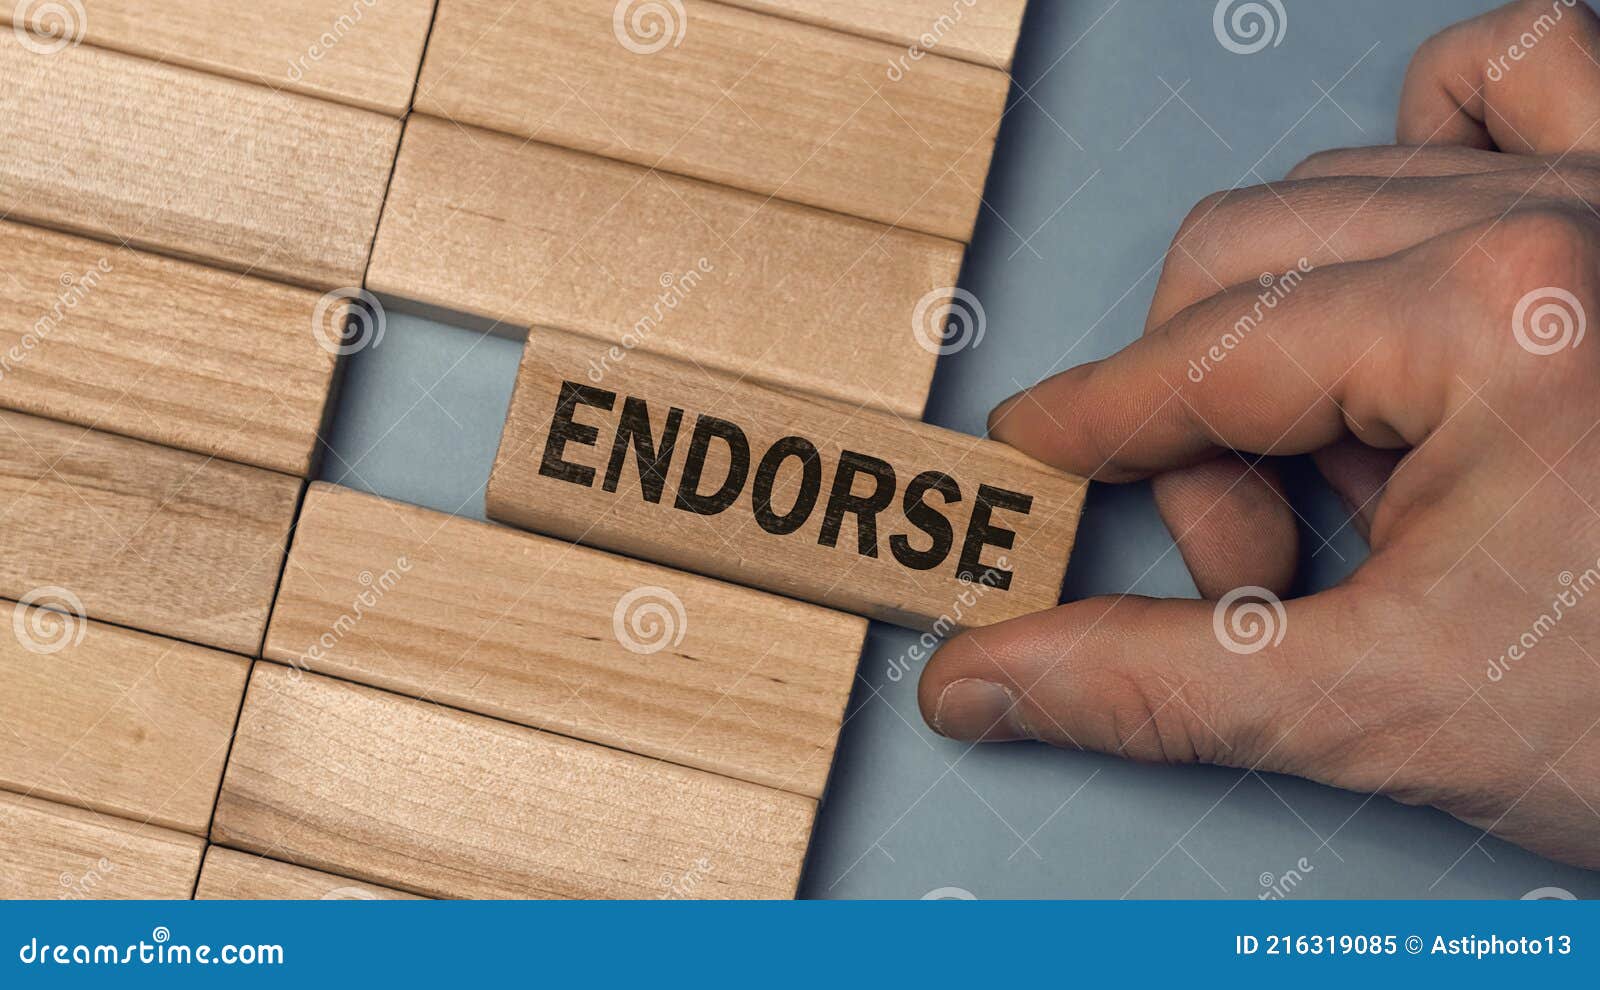 endorse word concept. close-up wooden piece blocks on the table